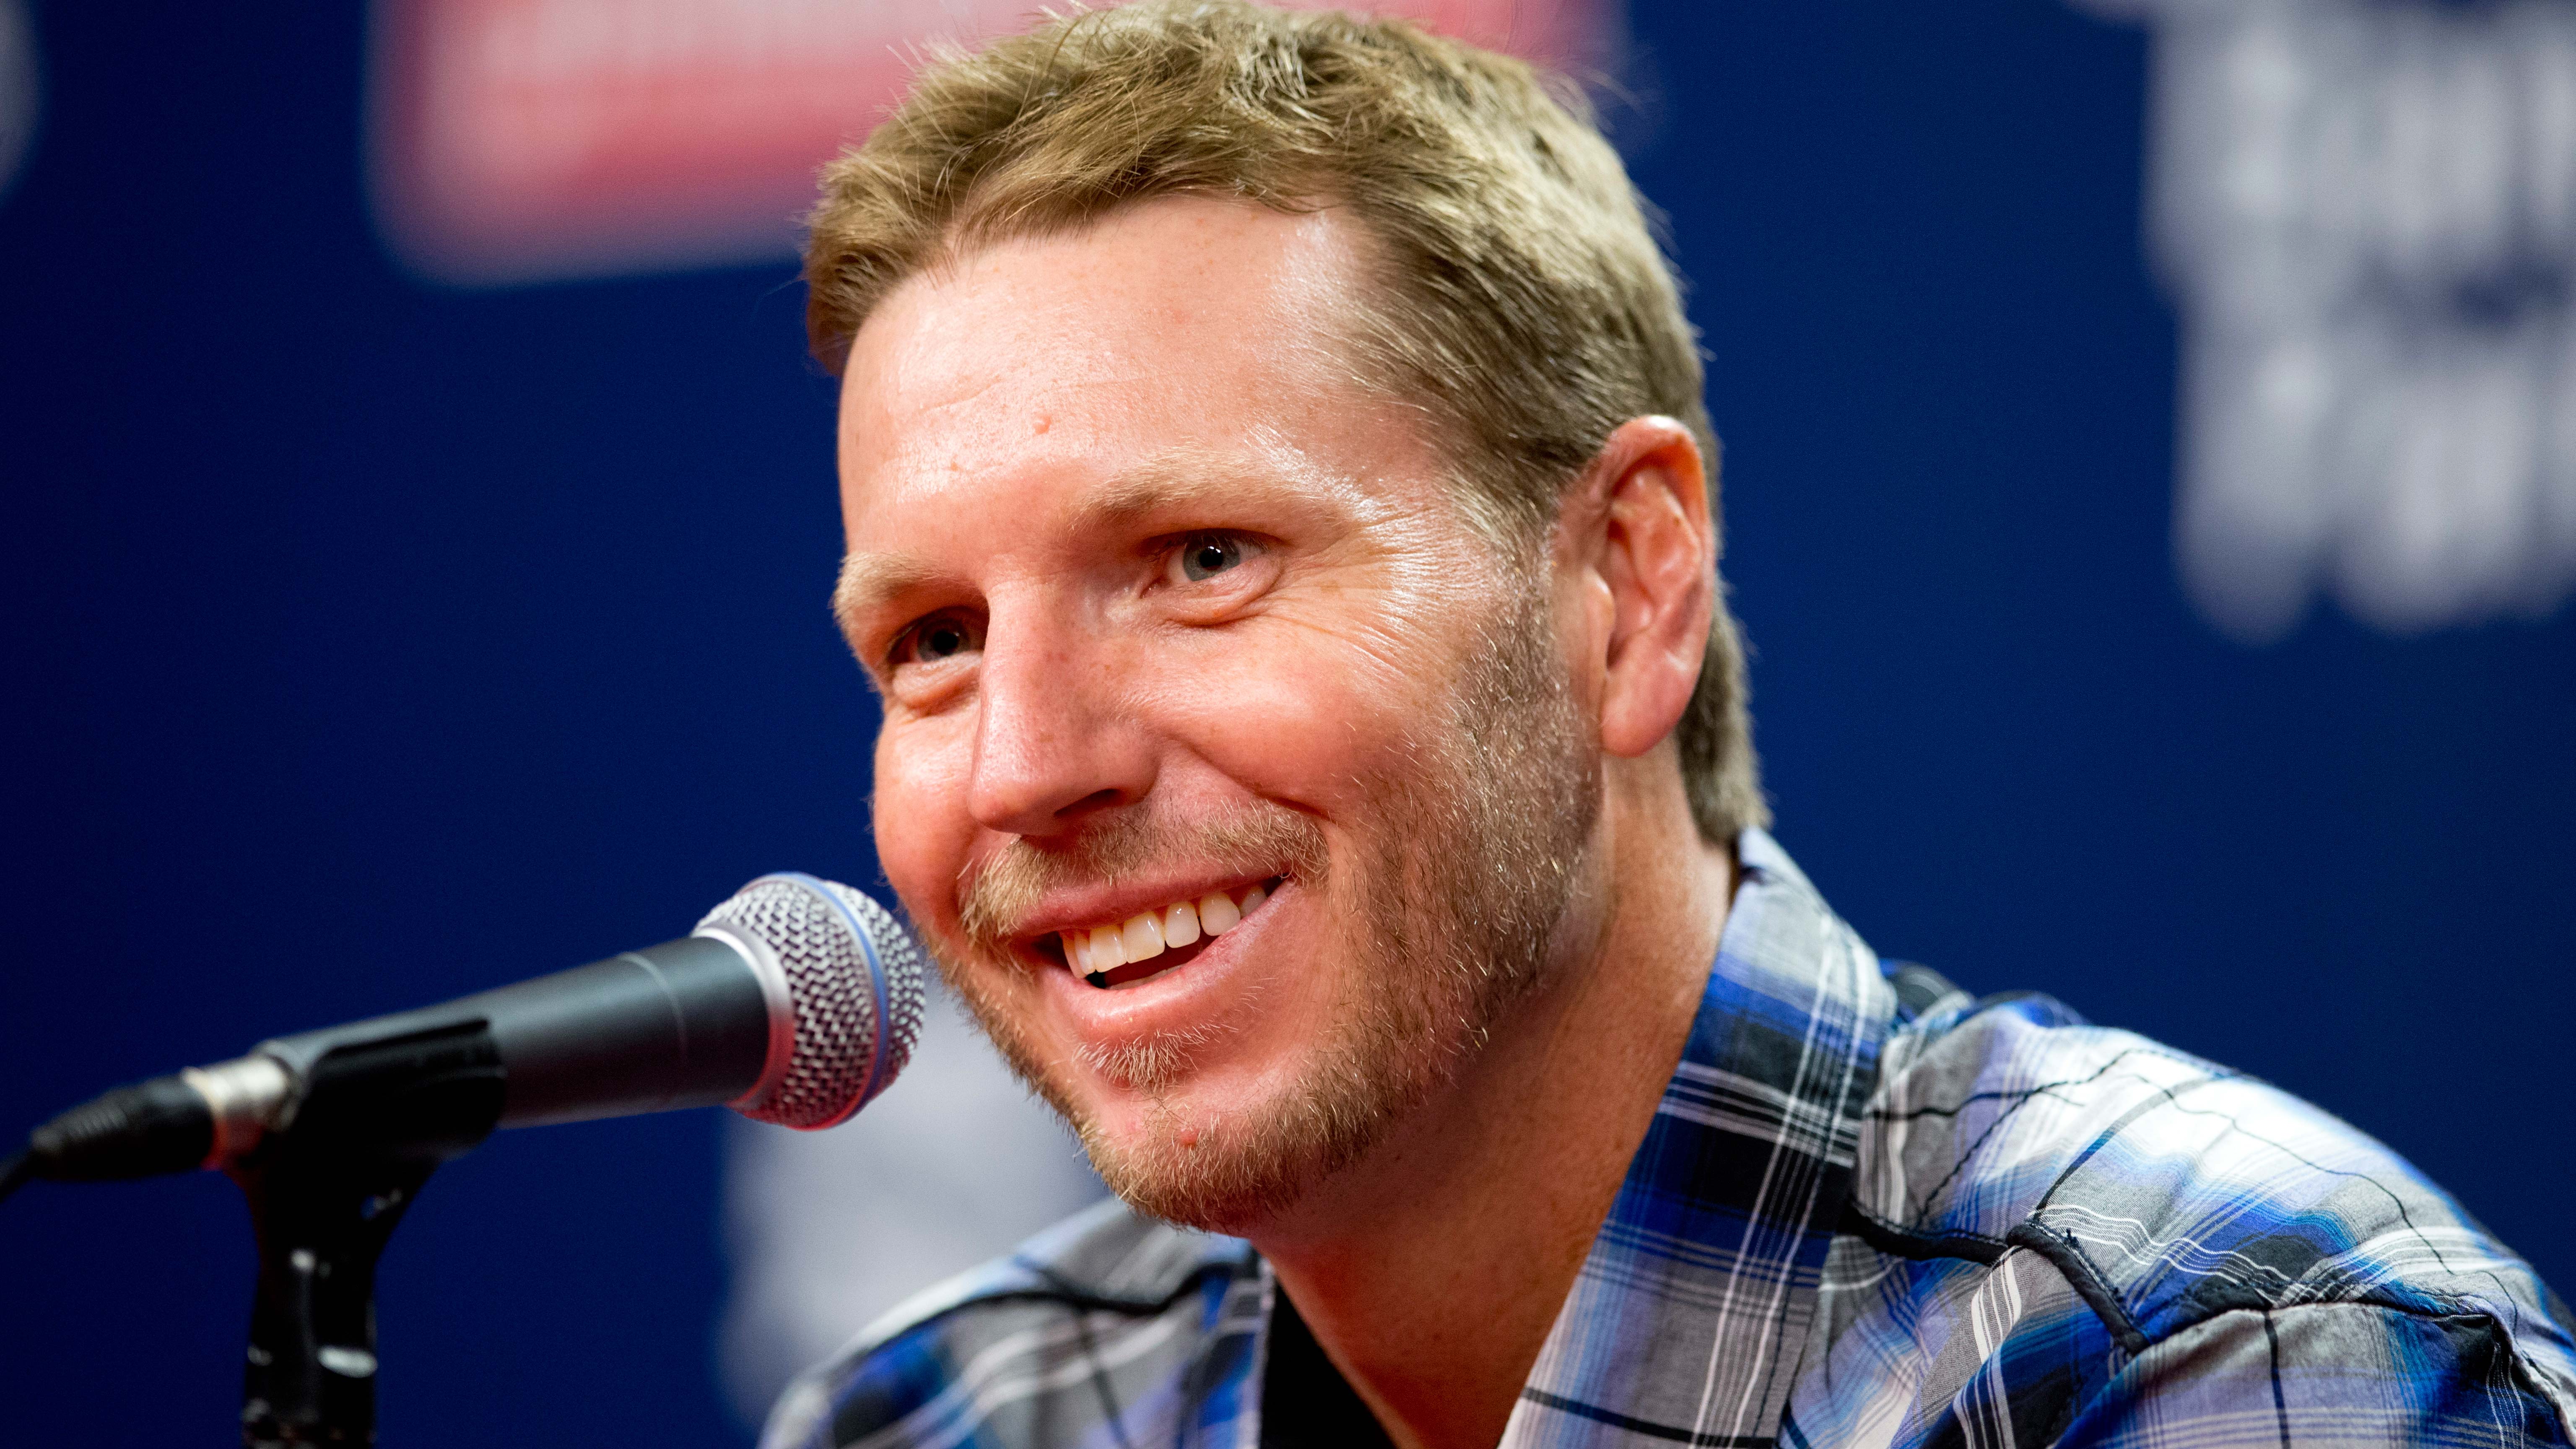 Roy Halladay: Baseball world mourns loss of pitching legend - The